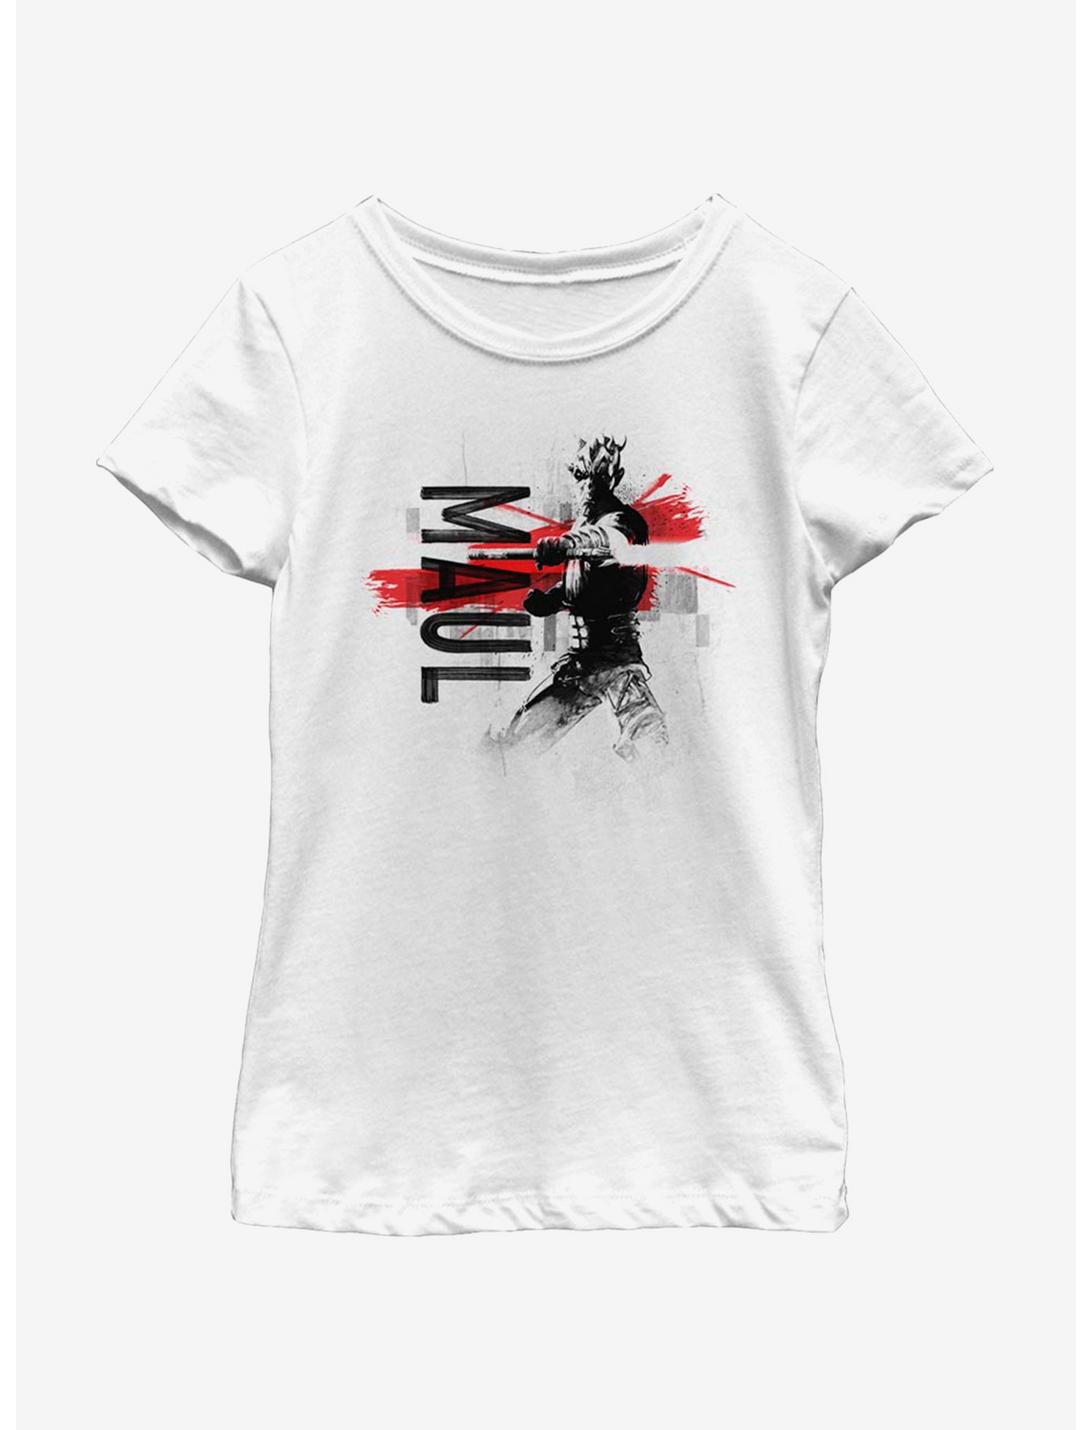 Star Wars: The Clone Wars Maul Collage Youth Girls T-Shirt, WHITE, hi-res